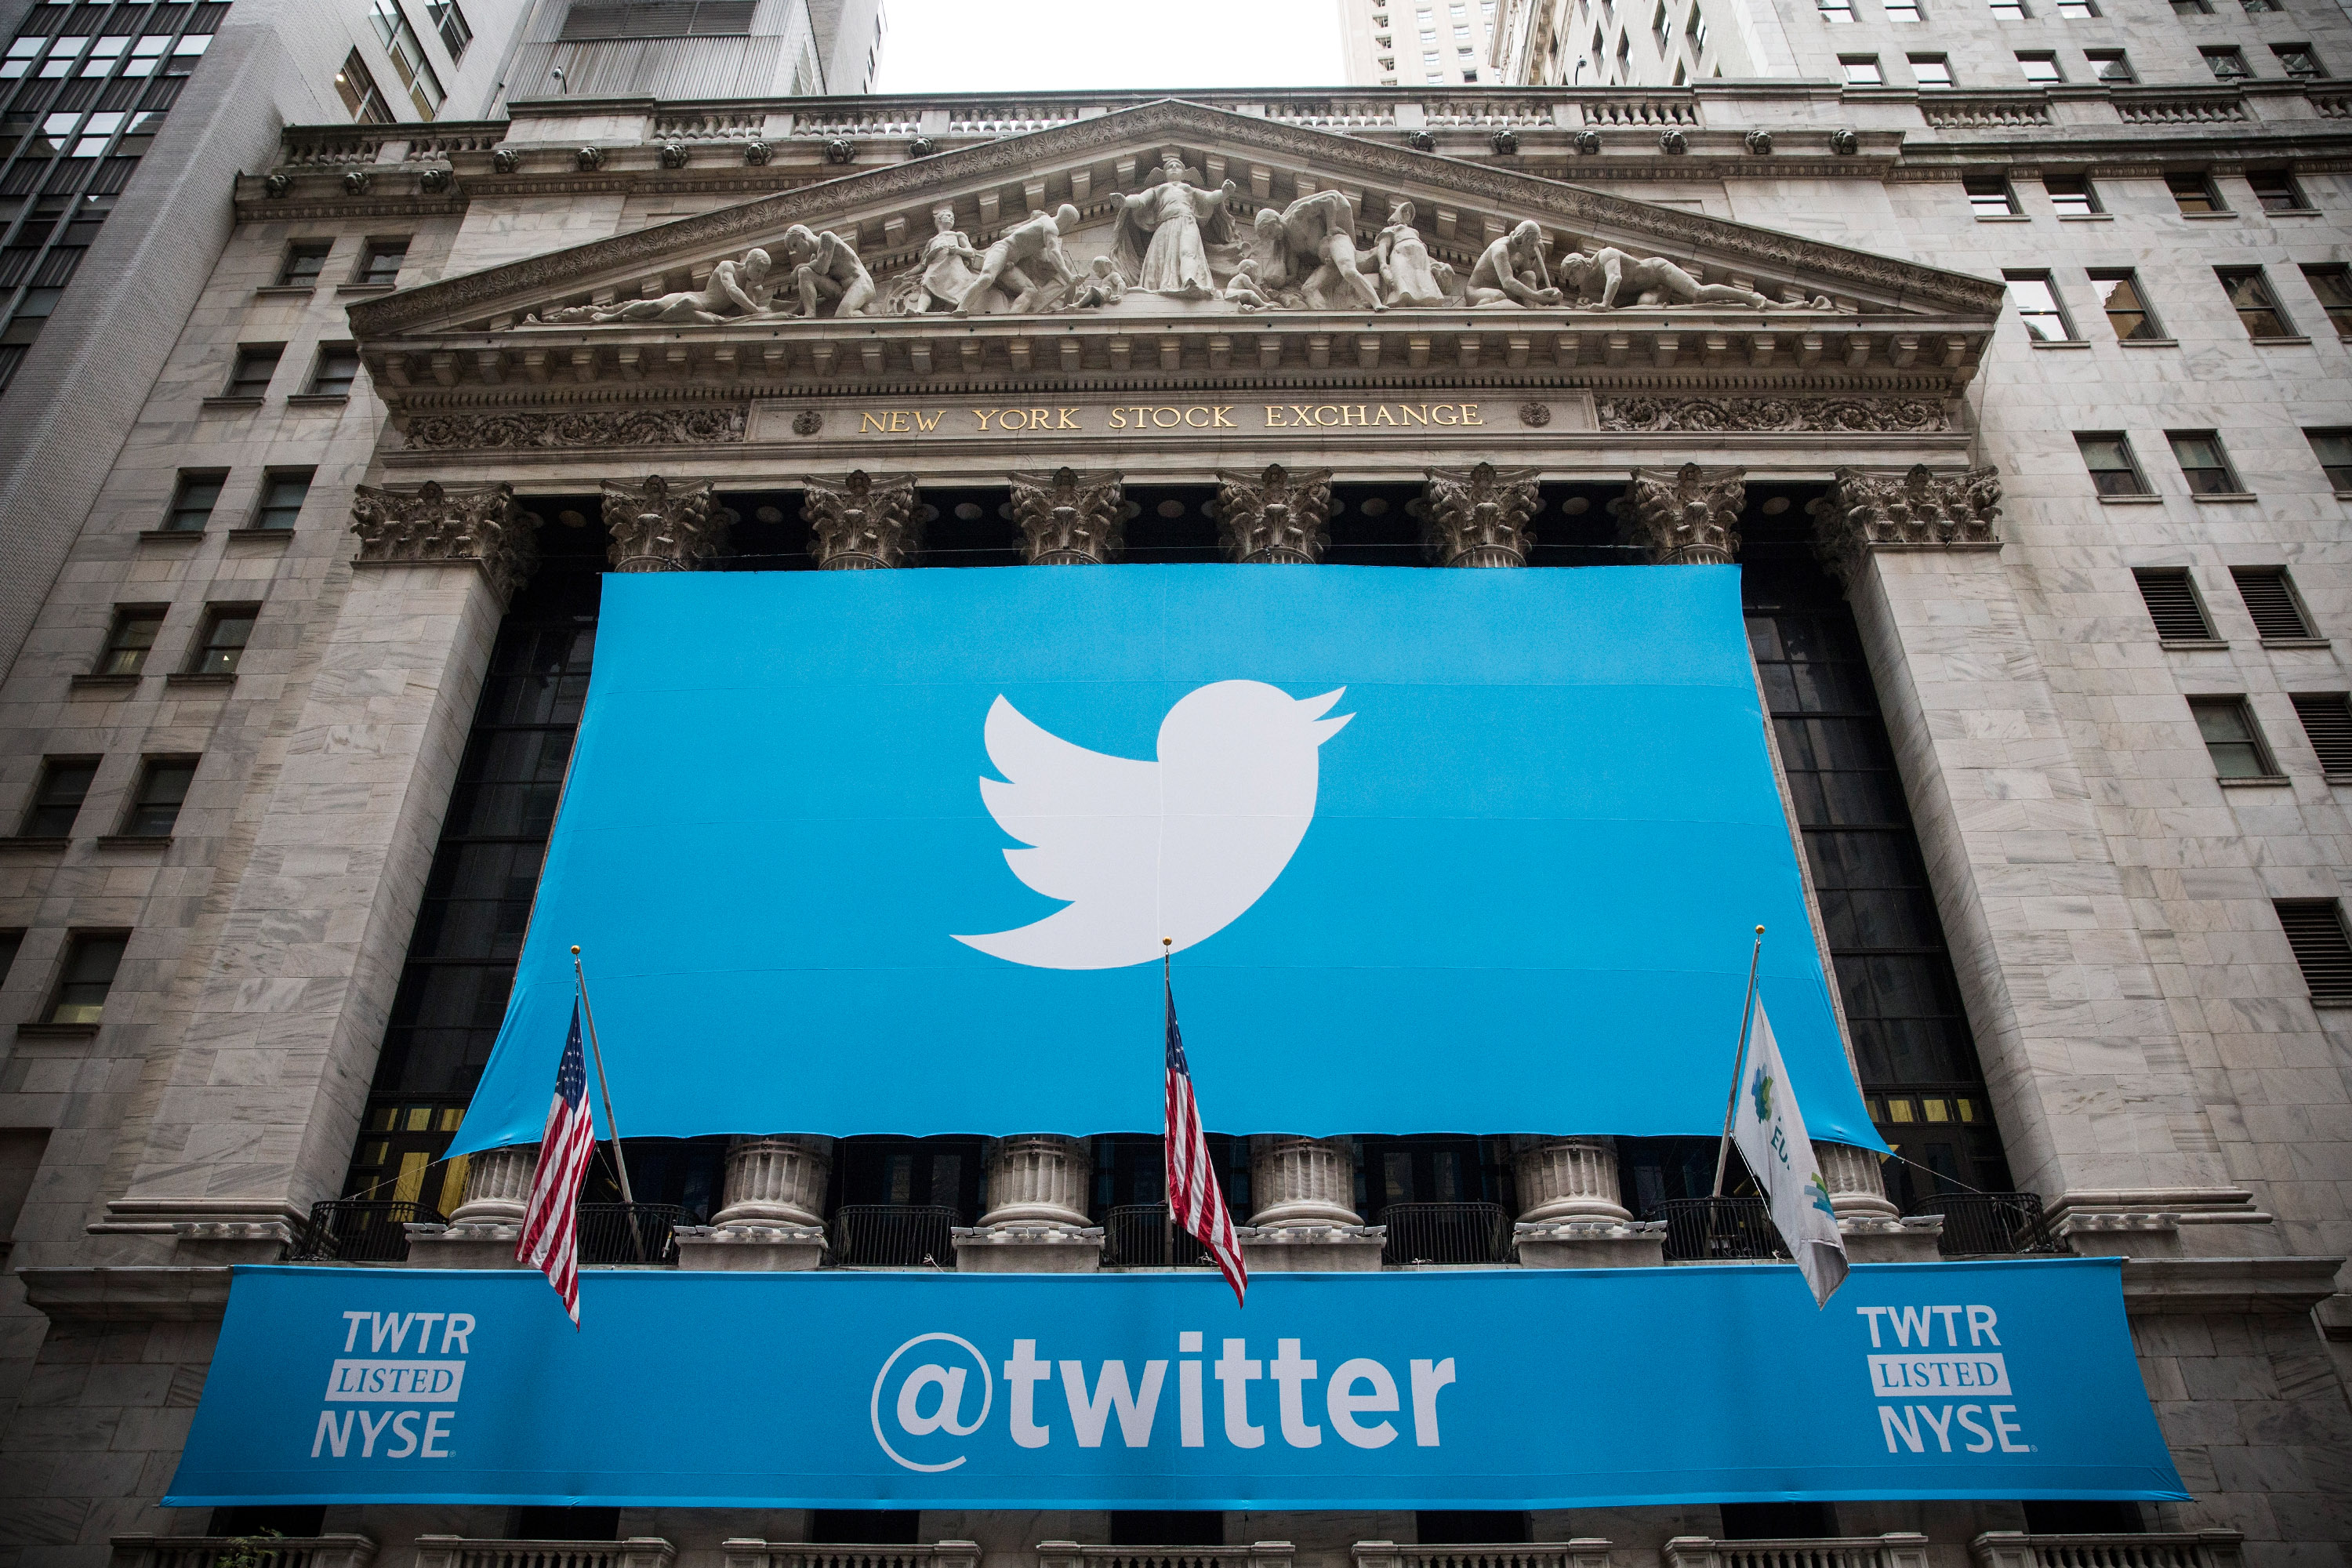 The Twitter logo is displayed on a banner outside the New York Stock Exchange (NYSE) on November 7, 2013 in New York City. (Andrew Burton&mdash;Getty Images)